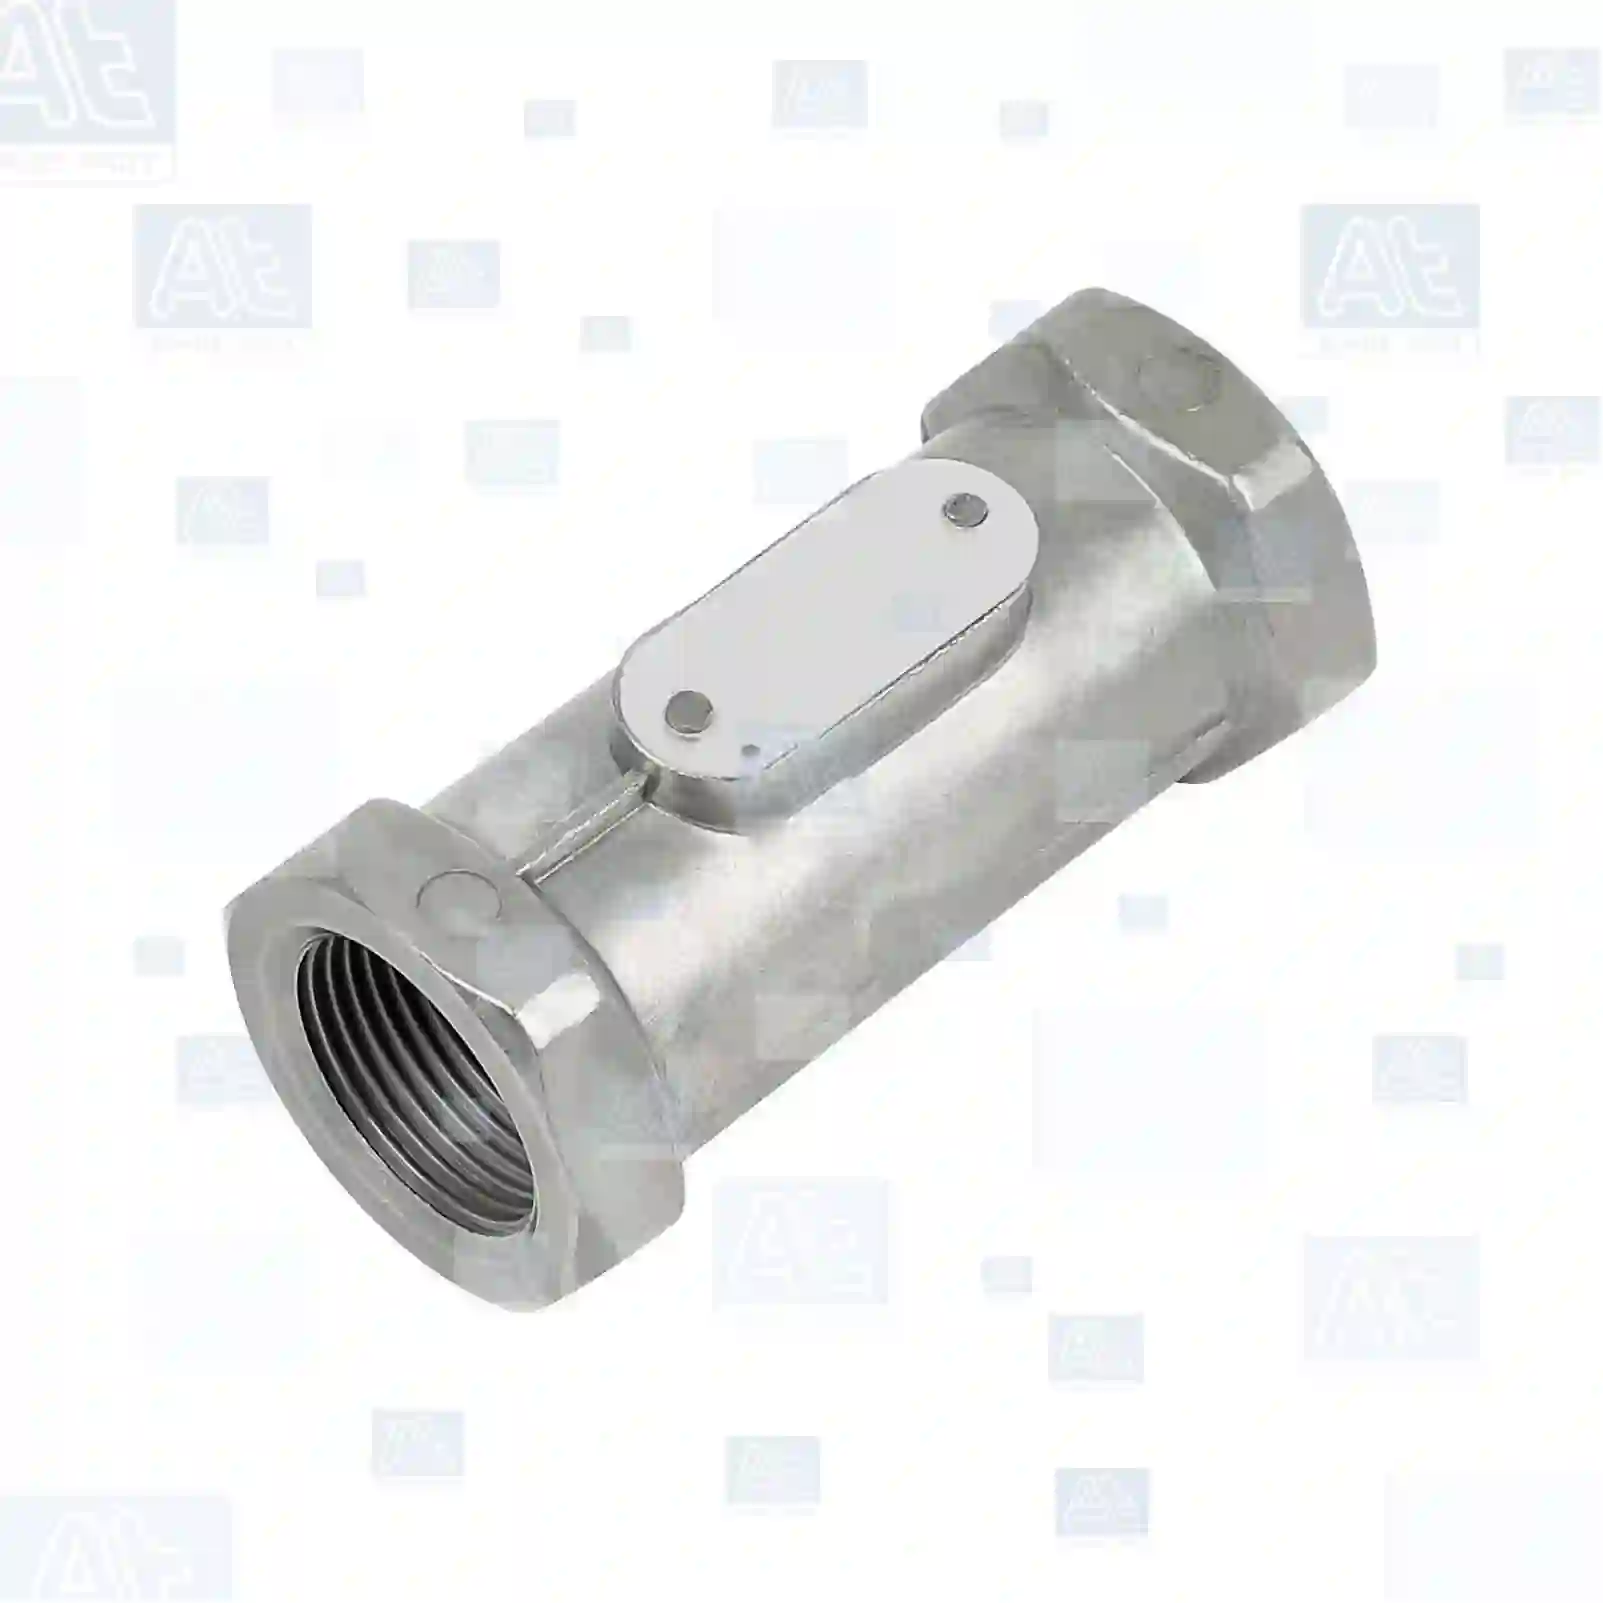 Relief valve, at no 77714676, oem no: 4004290744, 0587808, 1524863, 288495, 307475, 507808, 587808, F255880020010, G822880020120, A78860M10A02, AJX1009, CF3519226, 150980, 01125484, 02524385, 03342046, 04463747, 04700564, 04700995, 04712513, 04760670, 42007409, 500227227, 5801102155, 61601342, 71005206, 77392, 500945192, 945192, 502931701, 502939014, 81521206003, 81521206004, 81521206025, 81521206028, 81521206029, 81521206030, 81521206040, 81521206075, 85300016535, 88521206006, 88521206200, 0004204471, 0004290444, 0004290744, 0004311207, 0034290744, 0034292944, 0034296244, 0054296644, 011017366, 011017367, 110250600, 110250900, 46051-9X600, 49500701000, 495074, 16H2503780AA, 5000121974, 5000121975, 5000785947, 5021170093, 1012118, 1912297, 8283618000, 1102506000, 400032, 2V5607351, ZG50614-0008 At Spare Part | Engine, Accelerator Pedal, Camshaft, Connecting Rod, Crankcase, Crankshaft, Cylinder Head, Engine Suspension Mountings, Exhaust Manifold, Exhaust Gas Recirculation, Filter Kits, Flywheel Housing, General Overhaul Kits, Engine, Intake Manifold, Oil Cleaner, Oil Cooler, Oil Filter, Oil Pump, Oil Sump, Piston & Liner, Sensor & Switch, Timing Case, Turbocharger, Cooling System, Belt Tensioner, Coolant Filter, Coolant Pipe, Corrosion Prevention Agent, Drive, Expansion Tank, Fan, Intercooler, Monitors & Gauges, Radiator, Thermostat, V-Belt / Timing belt, Water Pump, Fuel System, Electronical Injector Unit, Feed Pump, Fuel Filter, cpl., Fuel Gauge Sender,  Fuel Line, Fuel Pump, Fuel Tank, Injection Line Kit, Injection Pump, Exhaust System, Clutch & Pedal, Gearbox, Propeller Shaft, Axles, Brake System, Hubs & Wheels, Suspension, Leaf Spring, Universal Parts / Accessories, Steering, Electrical System, Cabin Relief valve, at no 77714676, oem no: 4004290744, 0587808, 1524863, 288495, 307475, 507808, 587808, F255880020010, G822880020120, A78860M10A02, AJX1009, CF3519226, 150980, 01125484, 02524385, 03342046, 04463747, 04700564, 04700995, 04712513, 04760670, 42007409, 500227227, 5801102155, 61601342, 71005206, 77392, 500945192, 945192, 502931701, 502939014, 81521206003, 81521206004, 81521206025, 81521206028, 81521206029, 81521206030, 81521206040, 81521206075, 85300016535, 88521206006, 88521206200, 0004204471, 0004290444, 0004290744, 0004311207, 0034290744, 0034292944, 0034296244, 0054296644, 011017366, 011017367, 110250600, 110250900, 46051-9X600, 49500701000, 495074, 16H2503780AA, 5000121974, 5000121975, 5000785947, 5021170093, 1012118, 1912297, 8283618000, 1102506000, 400032, 2V5607351, ZG50614-0008 At Spare Part | Engine, Accelerator Pedal, Camshaft, Connecting Rod, Crankcase, Crankshaft, Cylinder Head, Engine Suspension Mountings, Exhaust Manifold, Exhaust Gas Recirculation, Filter Kits, Flywheel Housing, General Overhaul Kits, Engine, Intake Manifold, Oil Cleaner, Oil Cooler, Oil Filter, Oil Pump, Oil Sump, Piston & Liner, Sensor & Switch, Timing Case, Turbocharger, Cooling System, Belt Tensioner, Coolant Filter, Coolant Pipe, Corrosion Prevention Agent, Drive, Expansion Tank, Fan, Intercooler, Monitors & Gauges, Radiator, Thermostat, V-Belt / Timing belt, Water Pump, Fuel System, Electronical Injector Unit, Feed Pump, Fuel Filter, cpl., Fuel Gauge Sender,  Fuel Line, Fuel Pump, Fuel Tank, Injection Line Kit, Injection Pump, Exhaust System, Clutch & Pedal, Gearbox, Propeller Shaft, Axles, Brake System, Hubs & Wheels, Suspension, Leaf Spring, Universal Parts / Accessories, Steering, Electrical System, Cabin